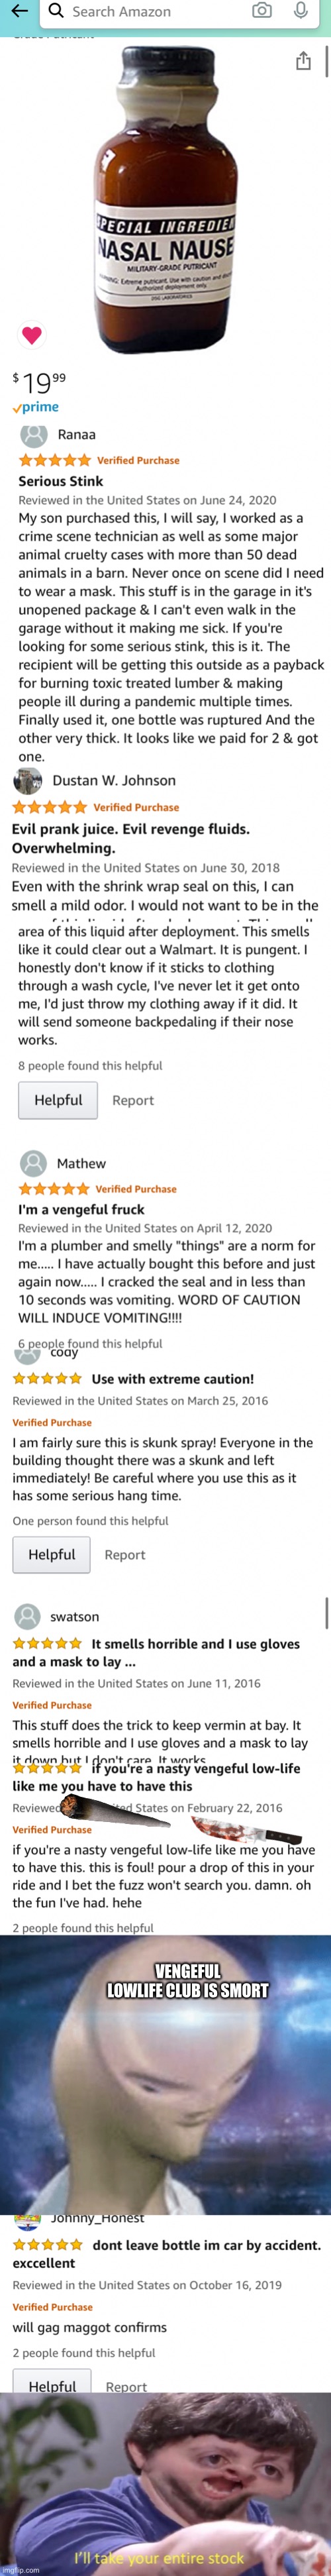 Do Amazon reviews count as comments? -Military grade stink bomb | VENGEFUL LOWLIFE CLUB IS SMORT | image tagged in smort,stink,military,amazon,review,beyondthecomments | made w/ Imgflip meme maker